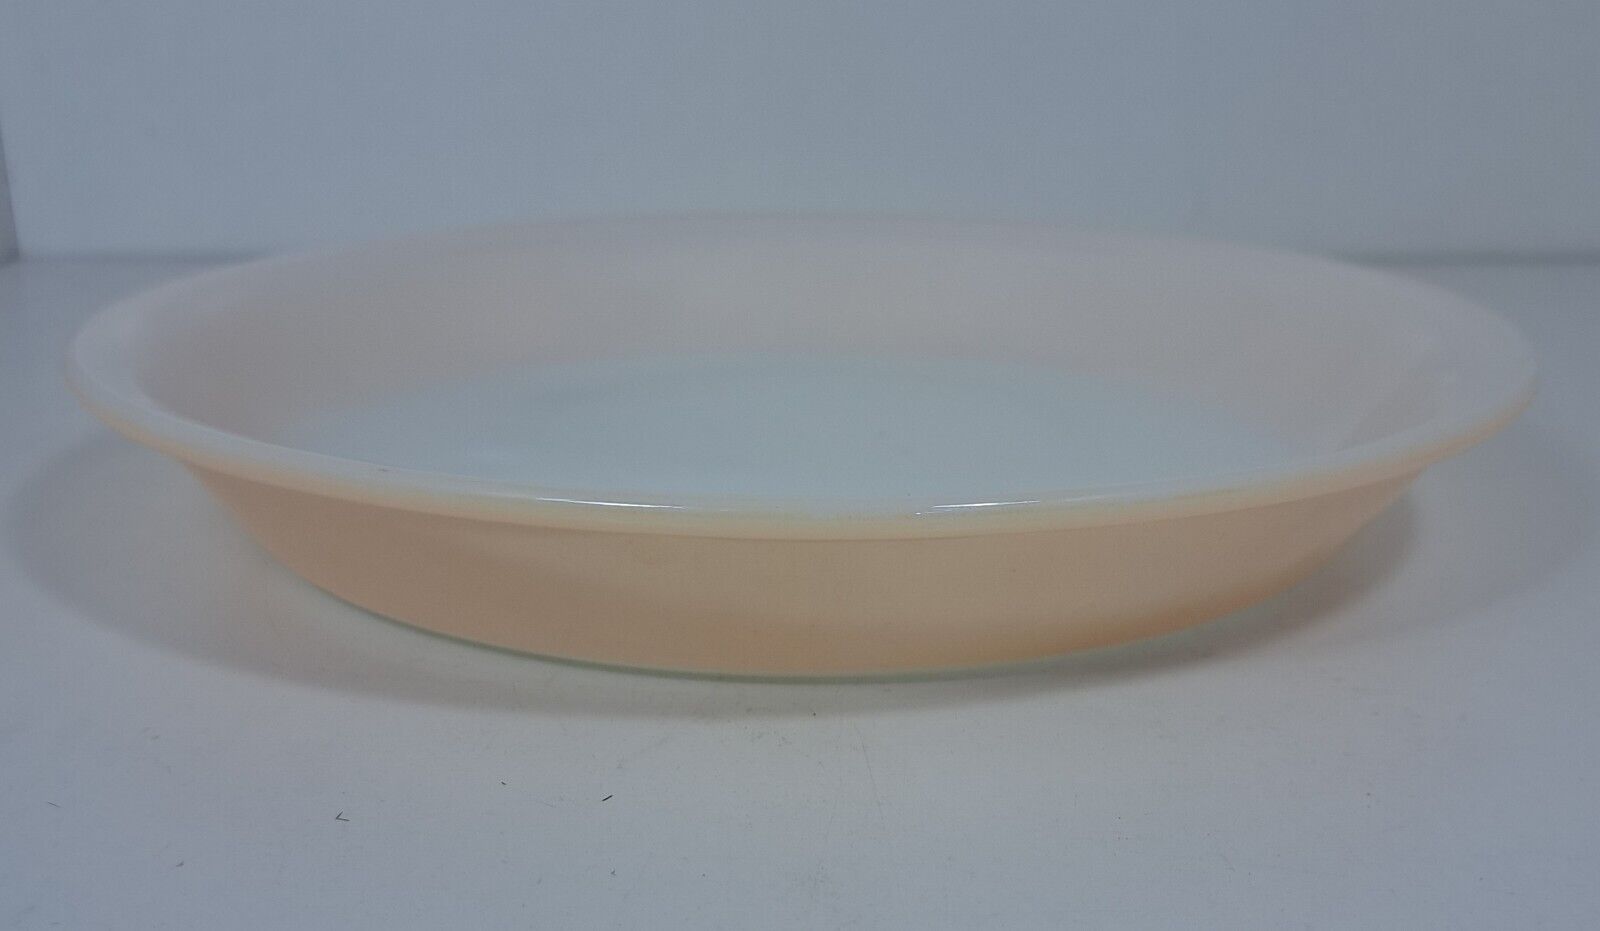 Vintage Anchor Hocking Fire King Peach Lustre Ware 9” Pie Pan Plate